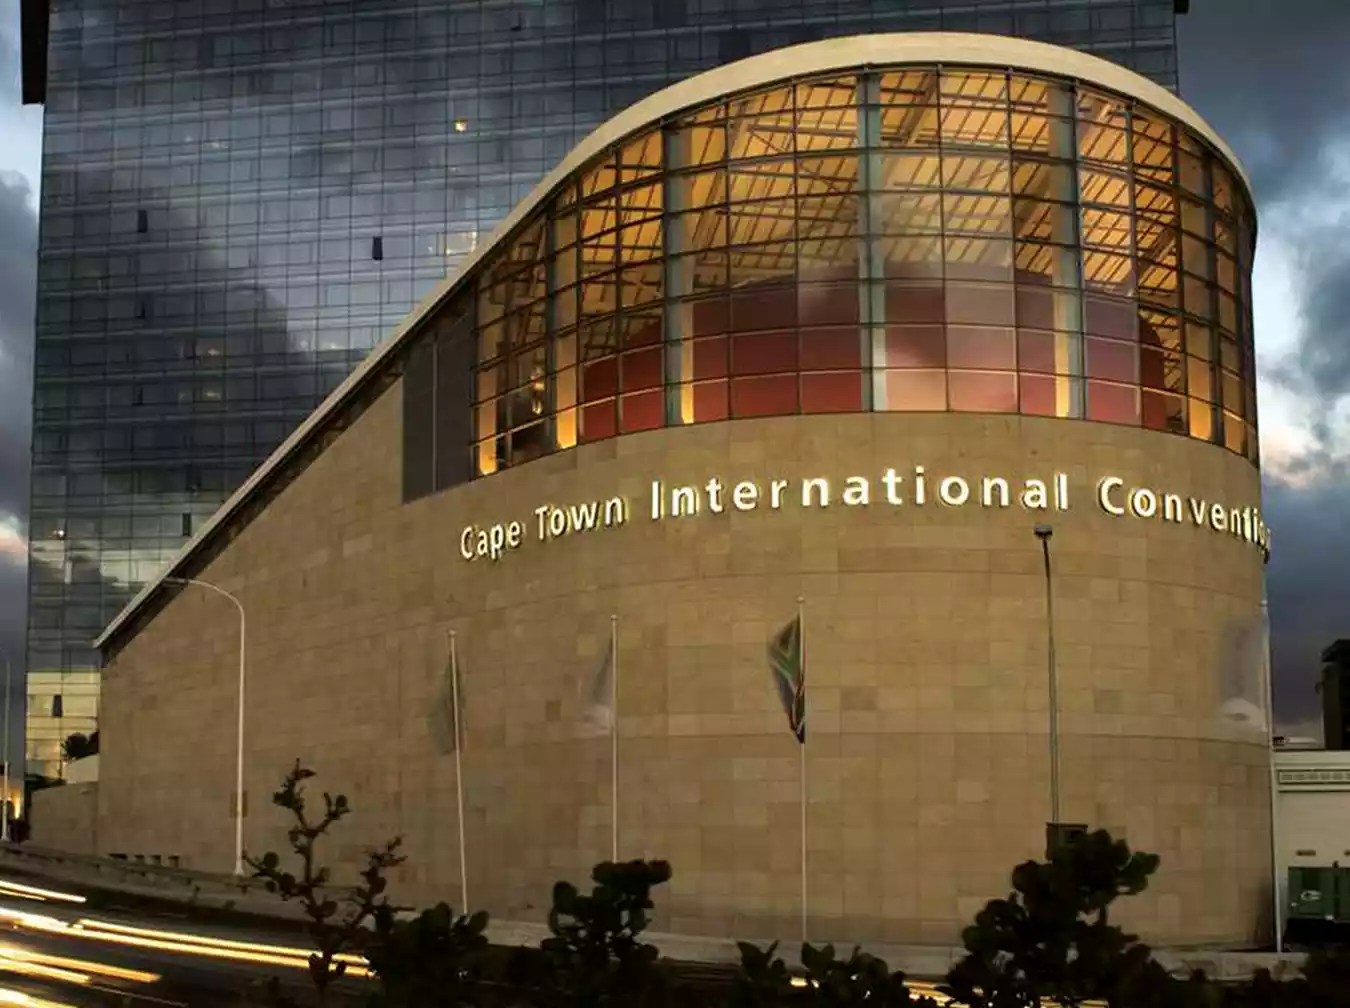 Cape Town International Convention Centre in South Africa hosts many leading African events